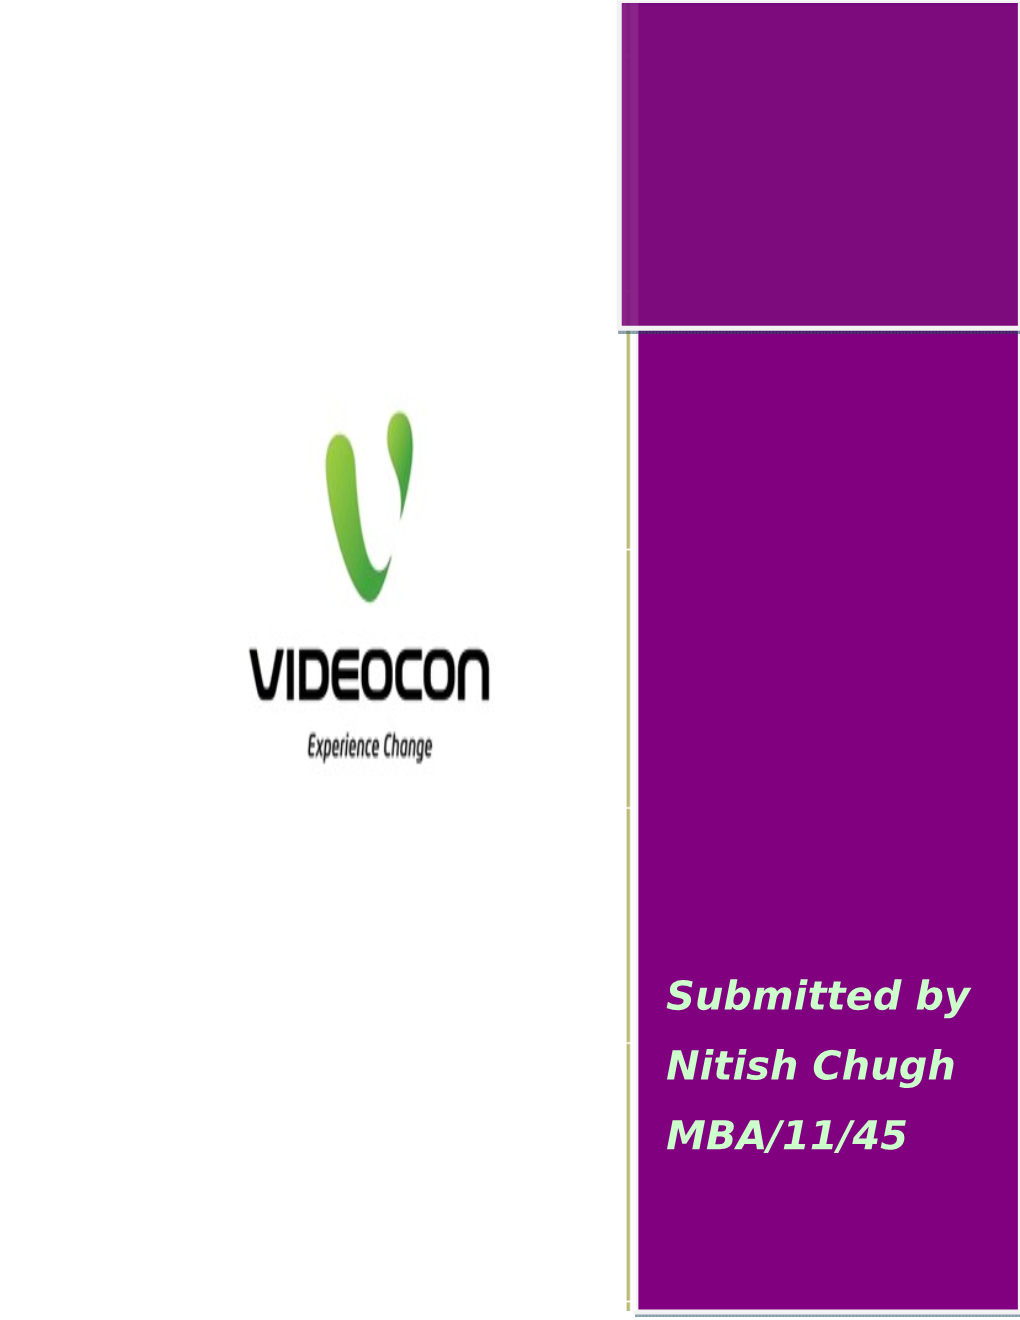 Submitted by Nitish Chugh MBA/11/45 VIDEOCON INDUSTRIES INDIA PVT